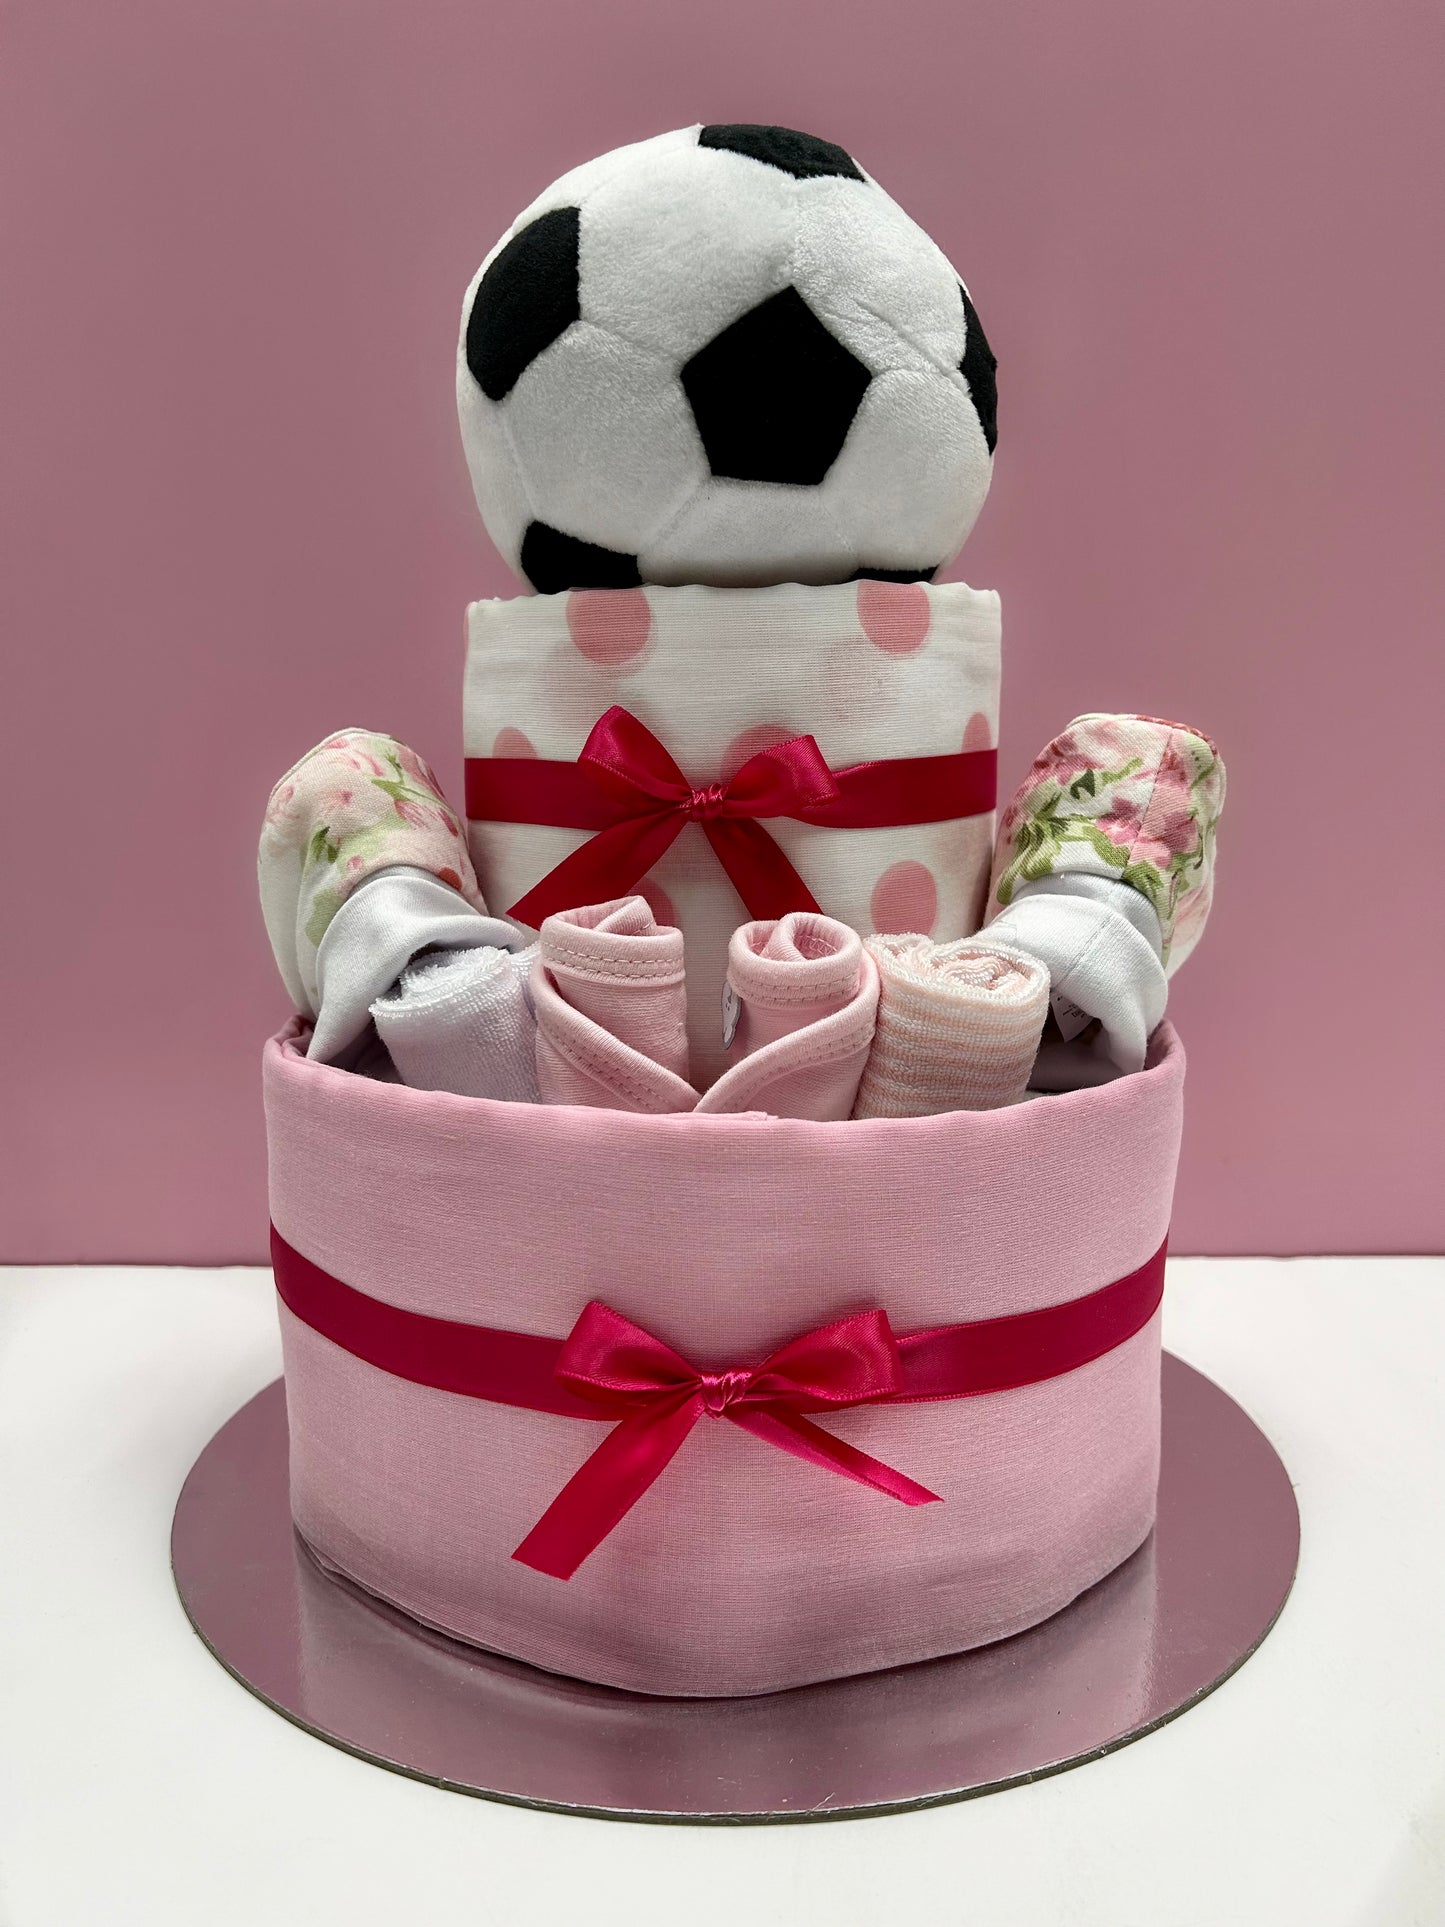 Soccer Nappy Cakes - The Hamper Specialist